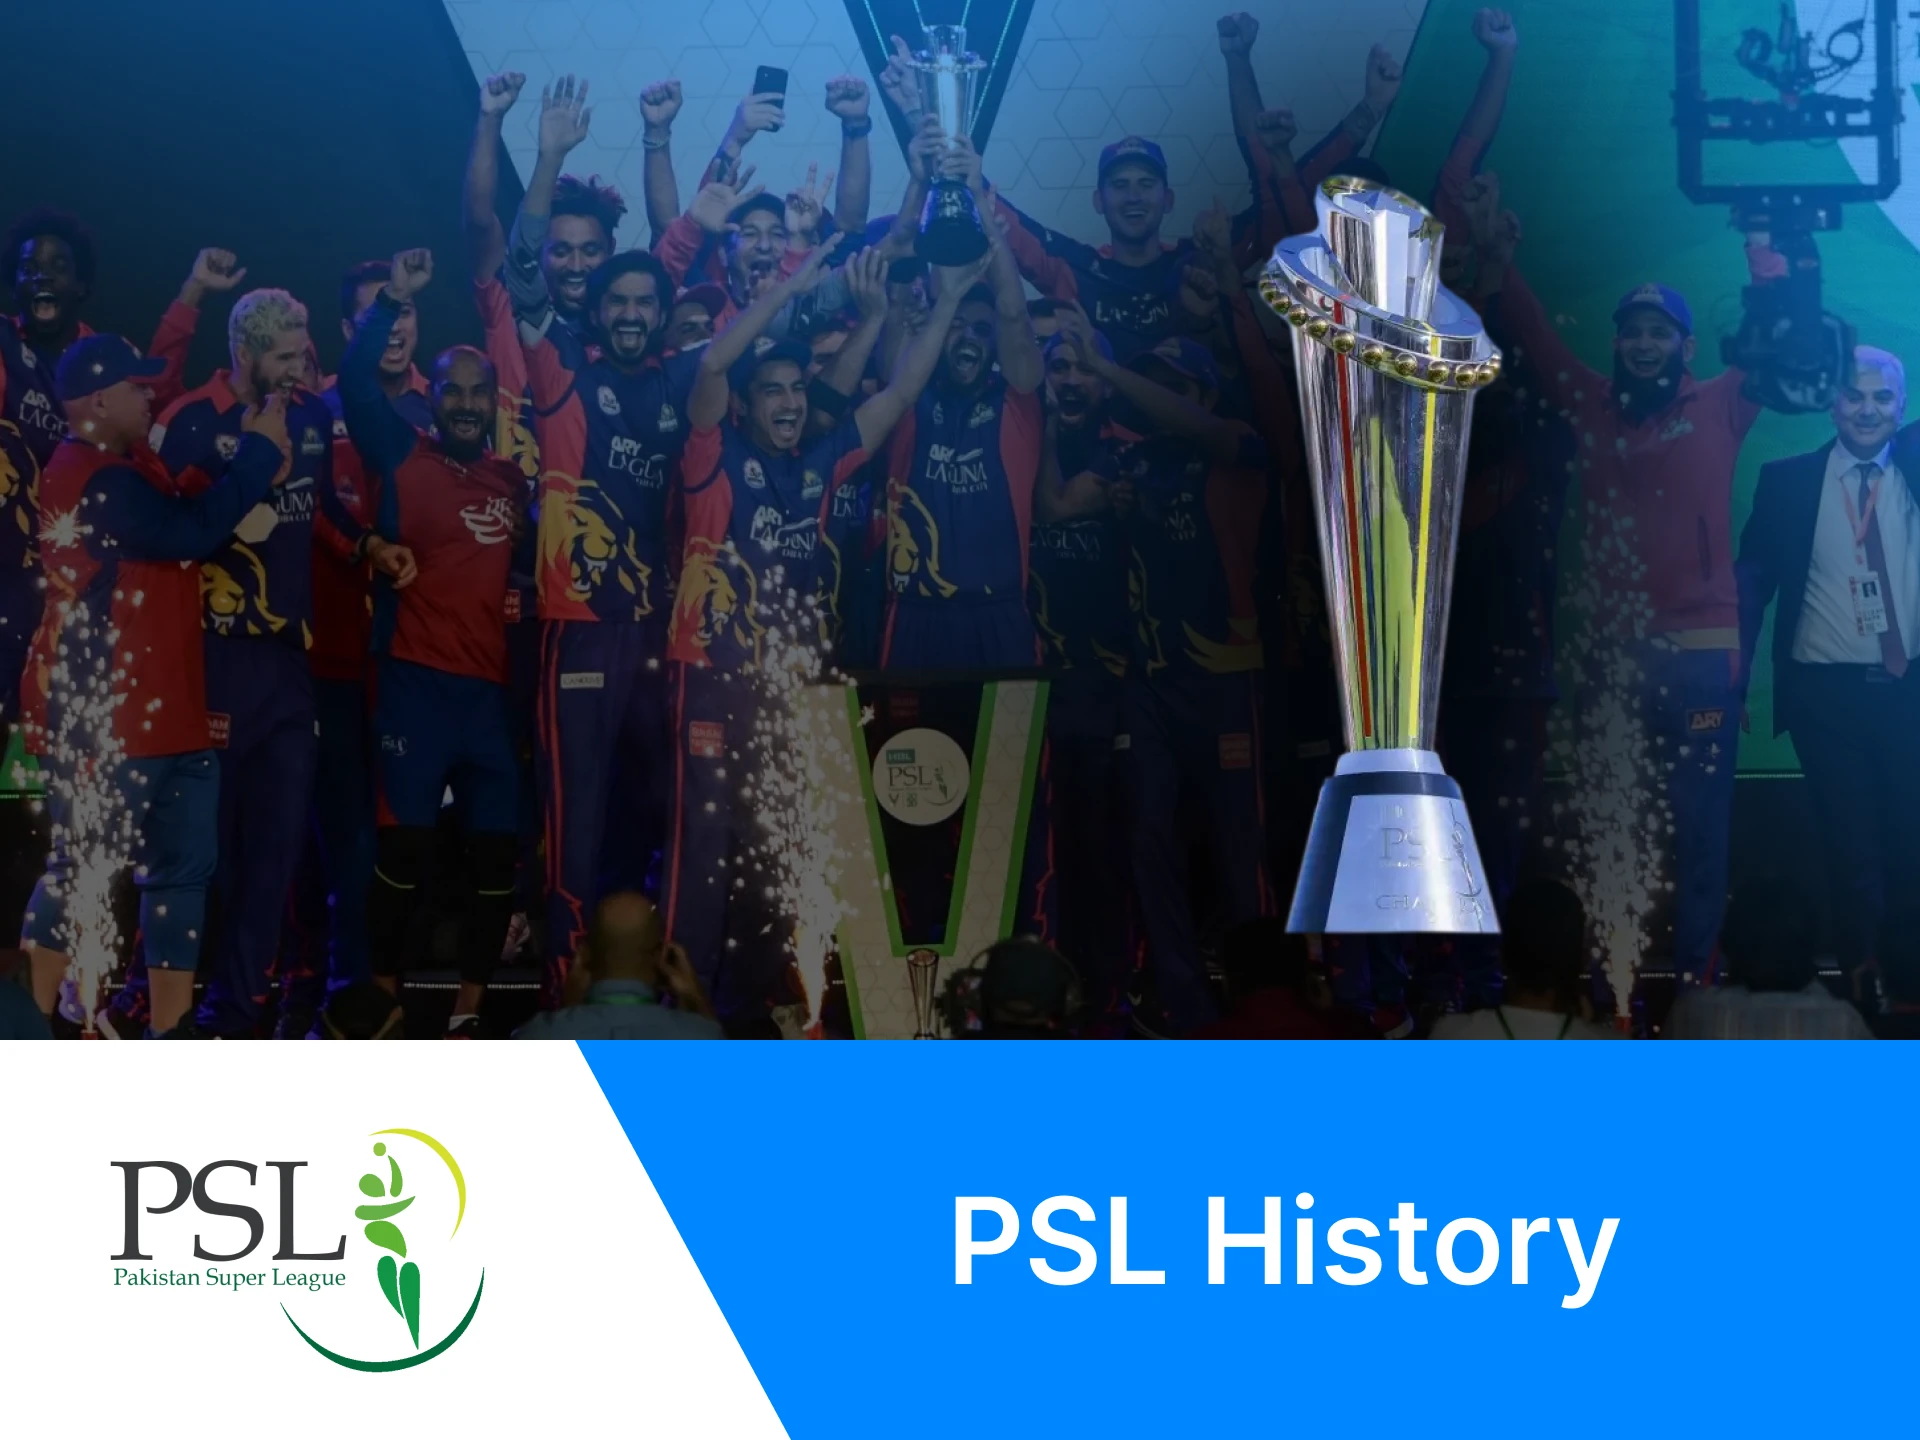 The first PSL tournament was held in 2016.